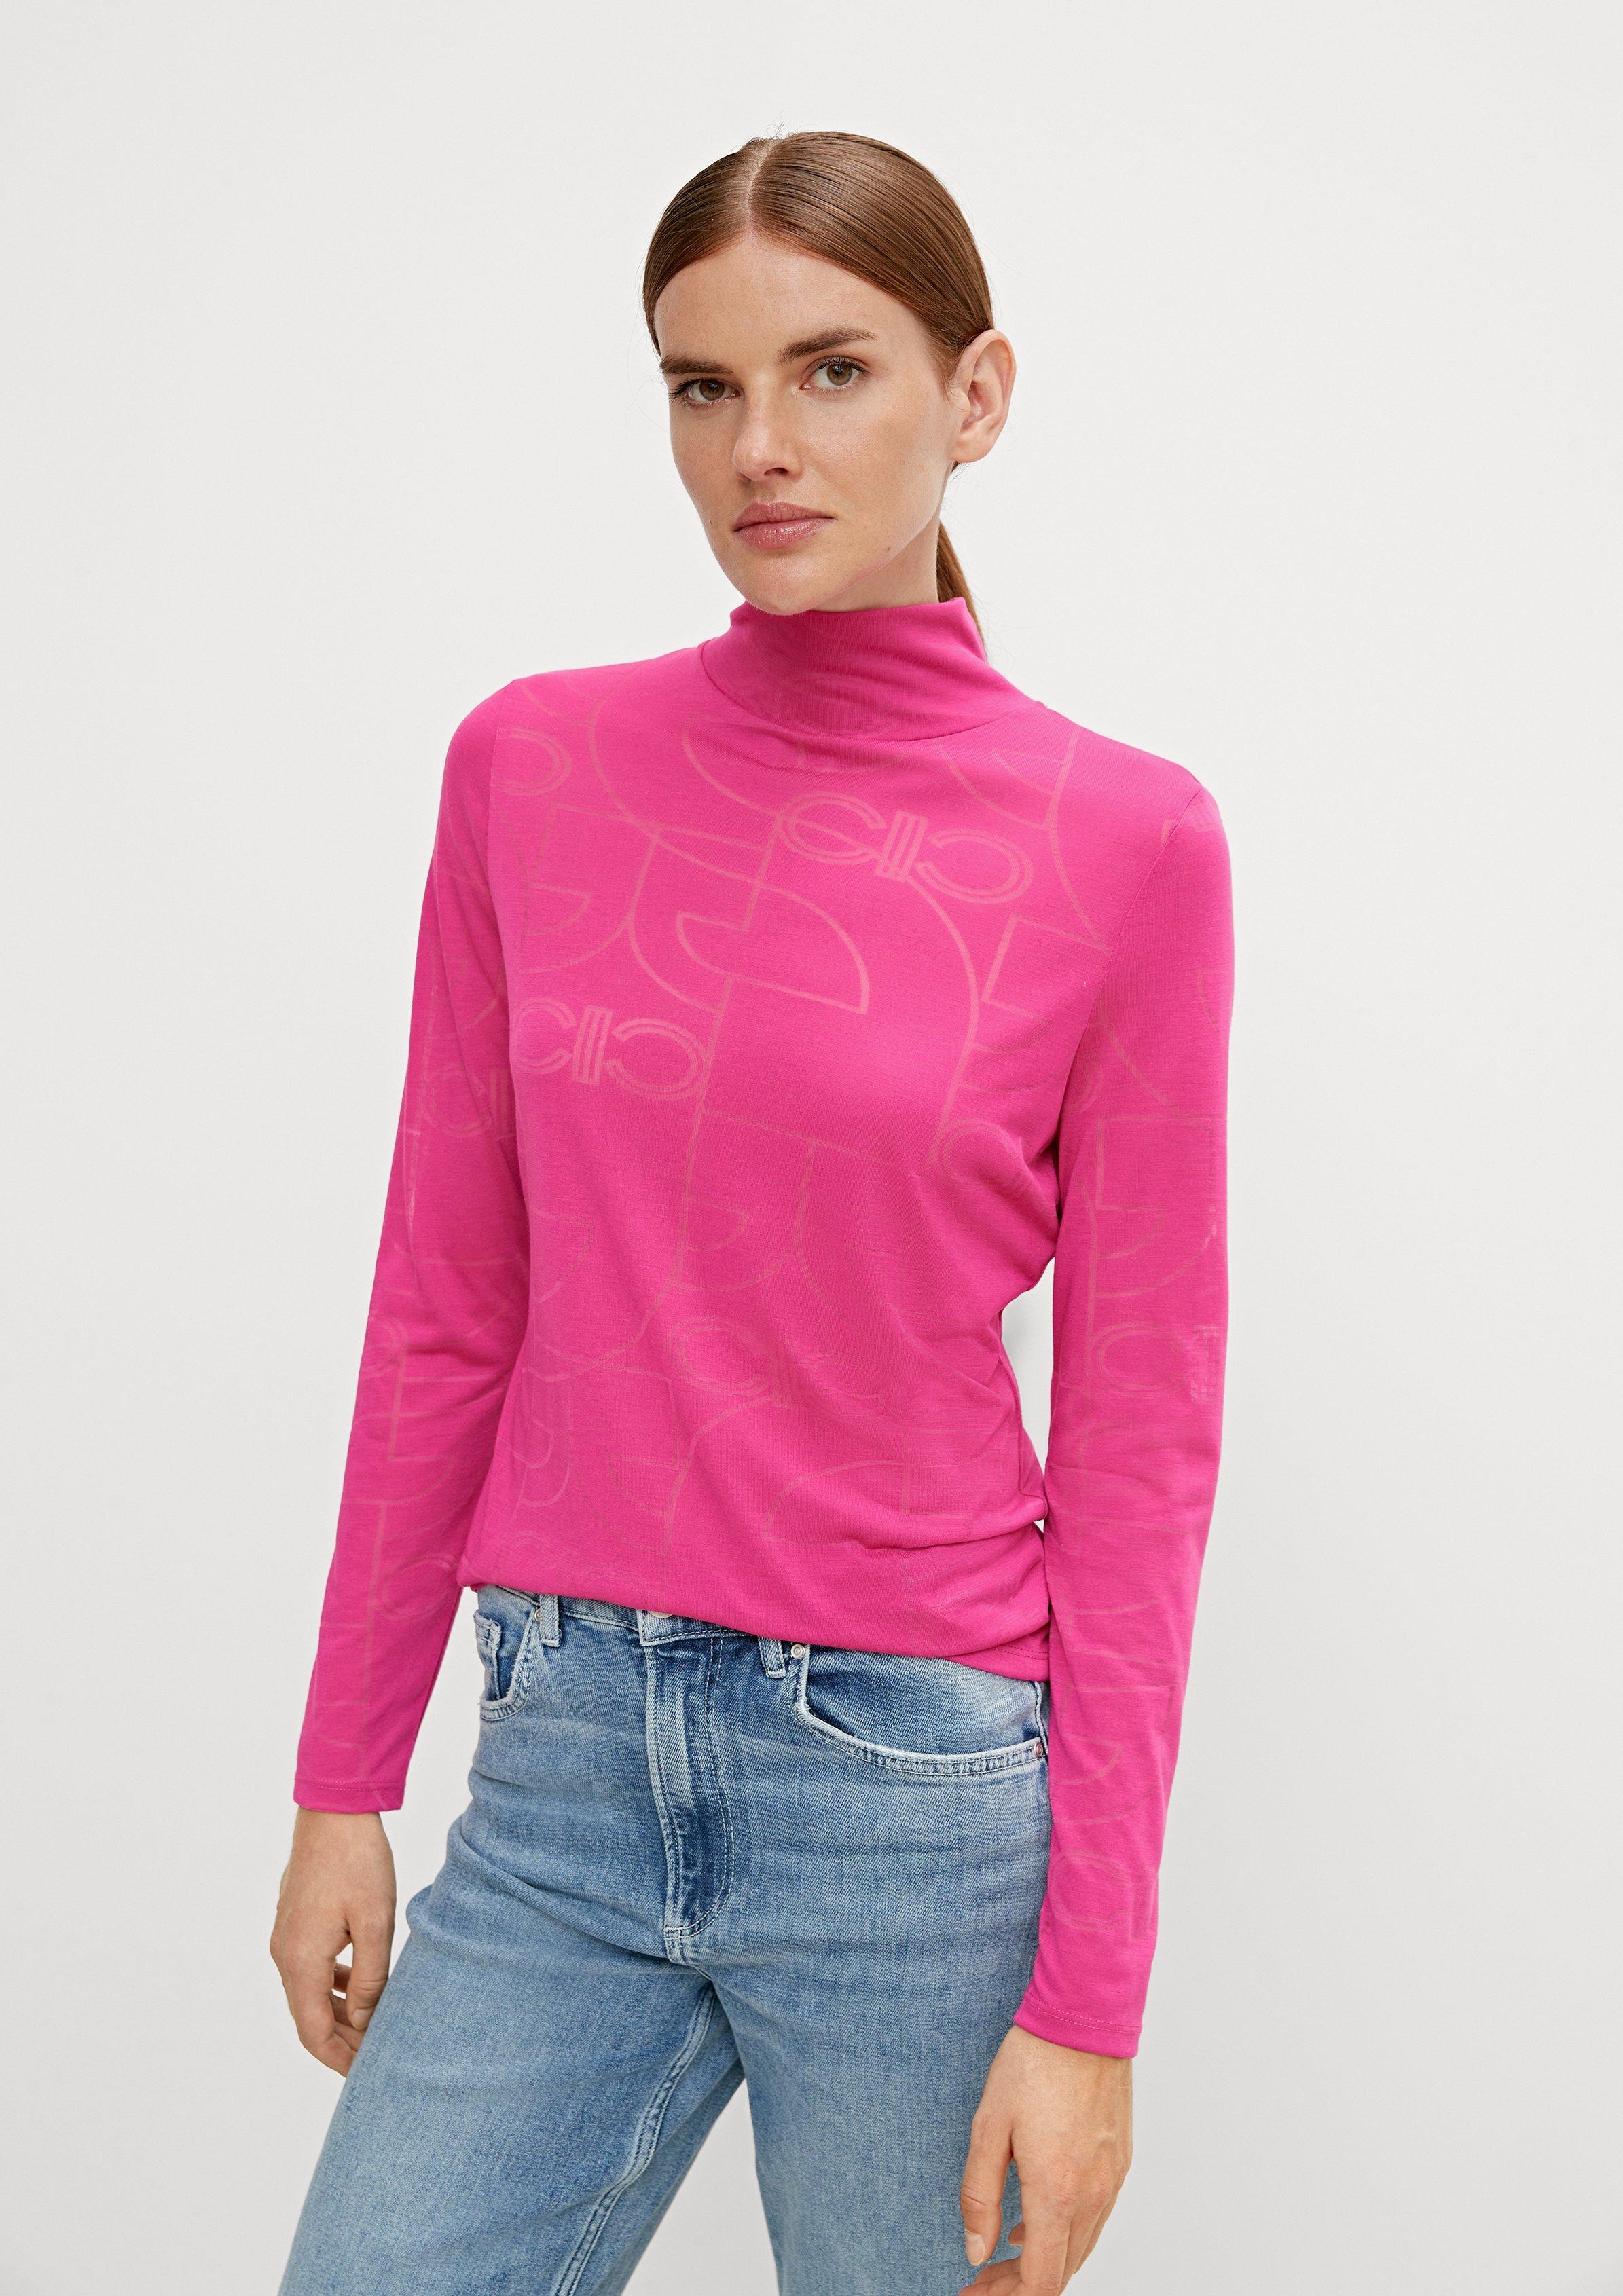 Long sleeve top - pink | Comma